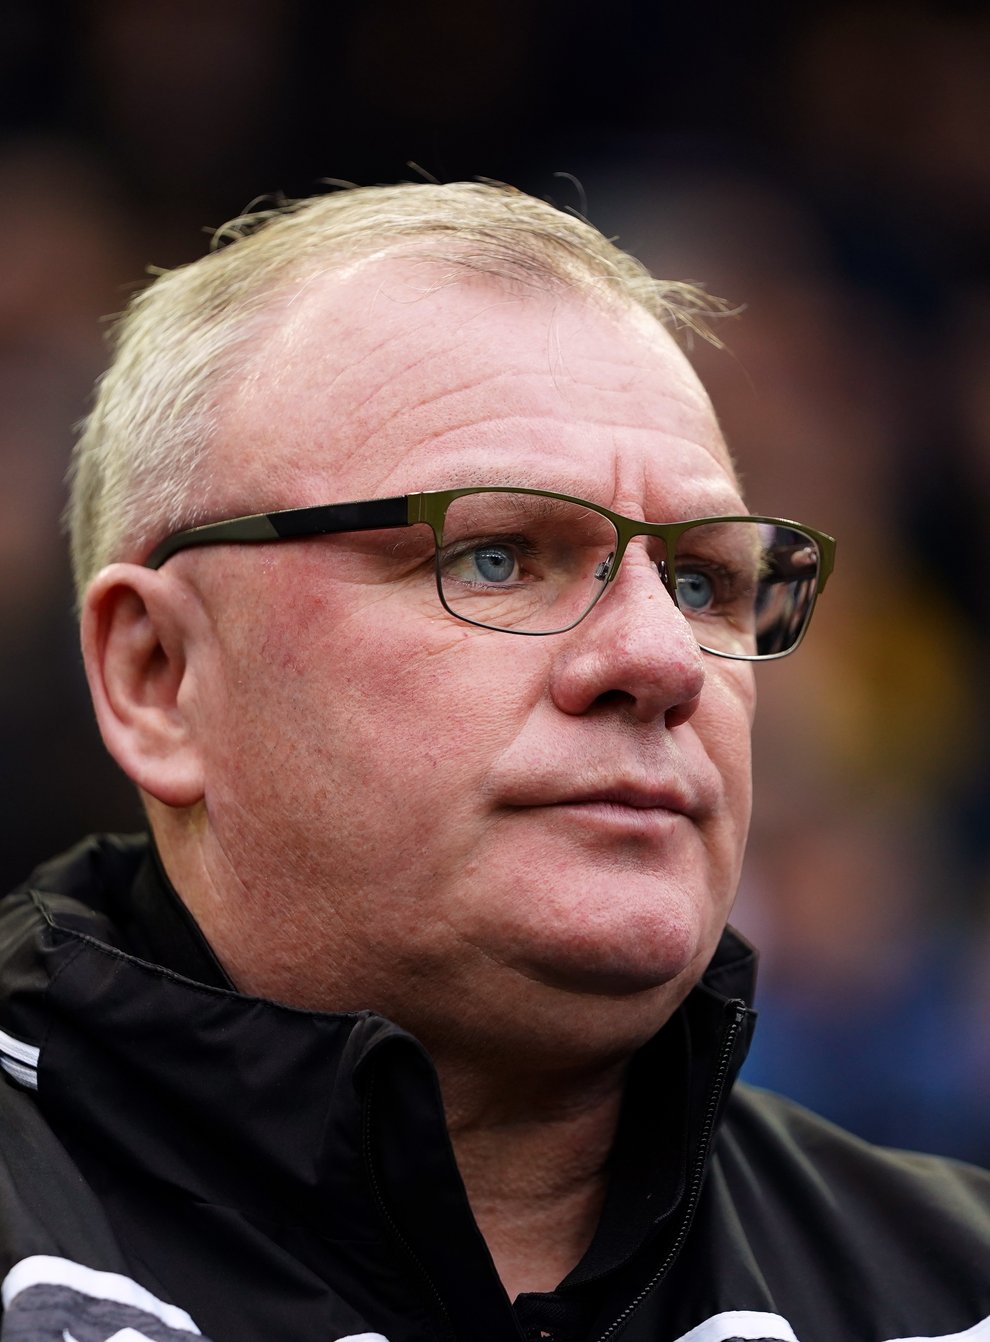 Steve Evans may switch things up for the visit of Salford (Zac Goodwin/PA)